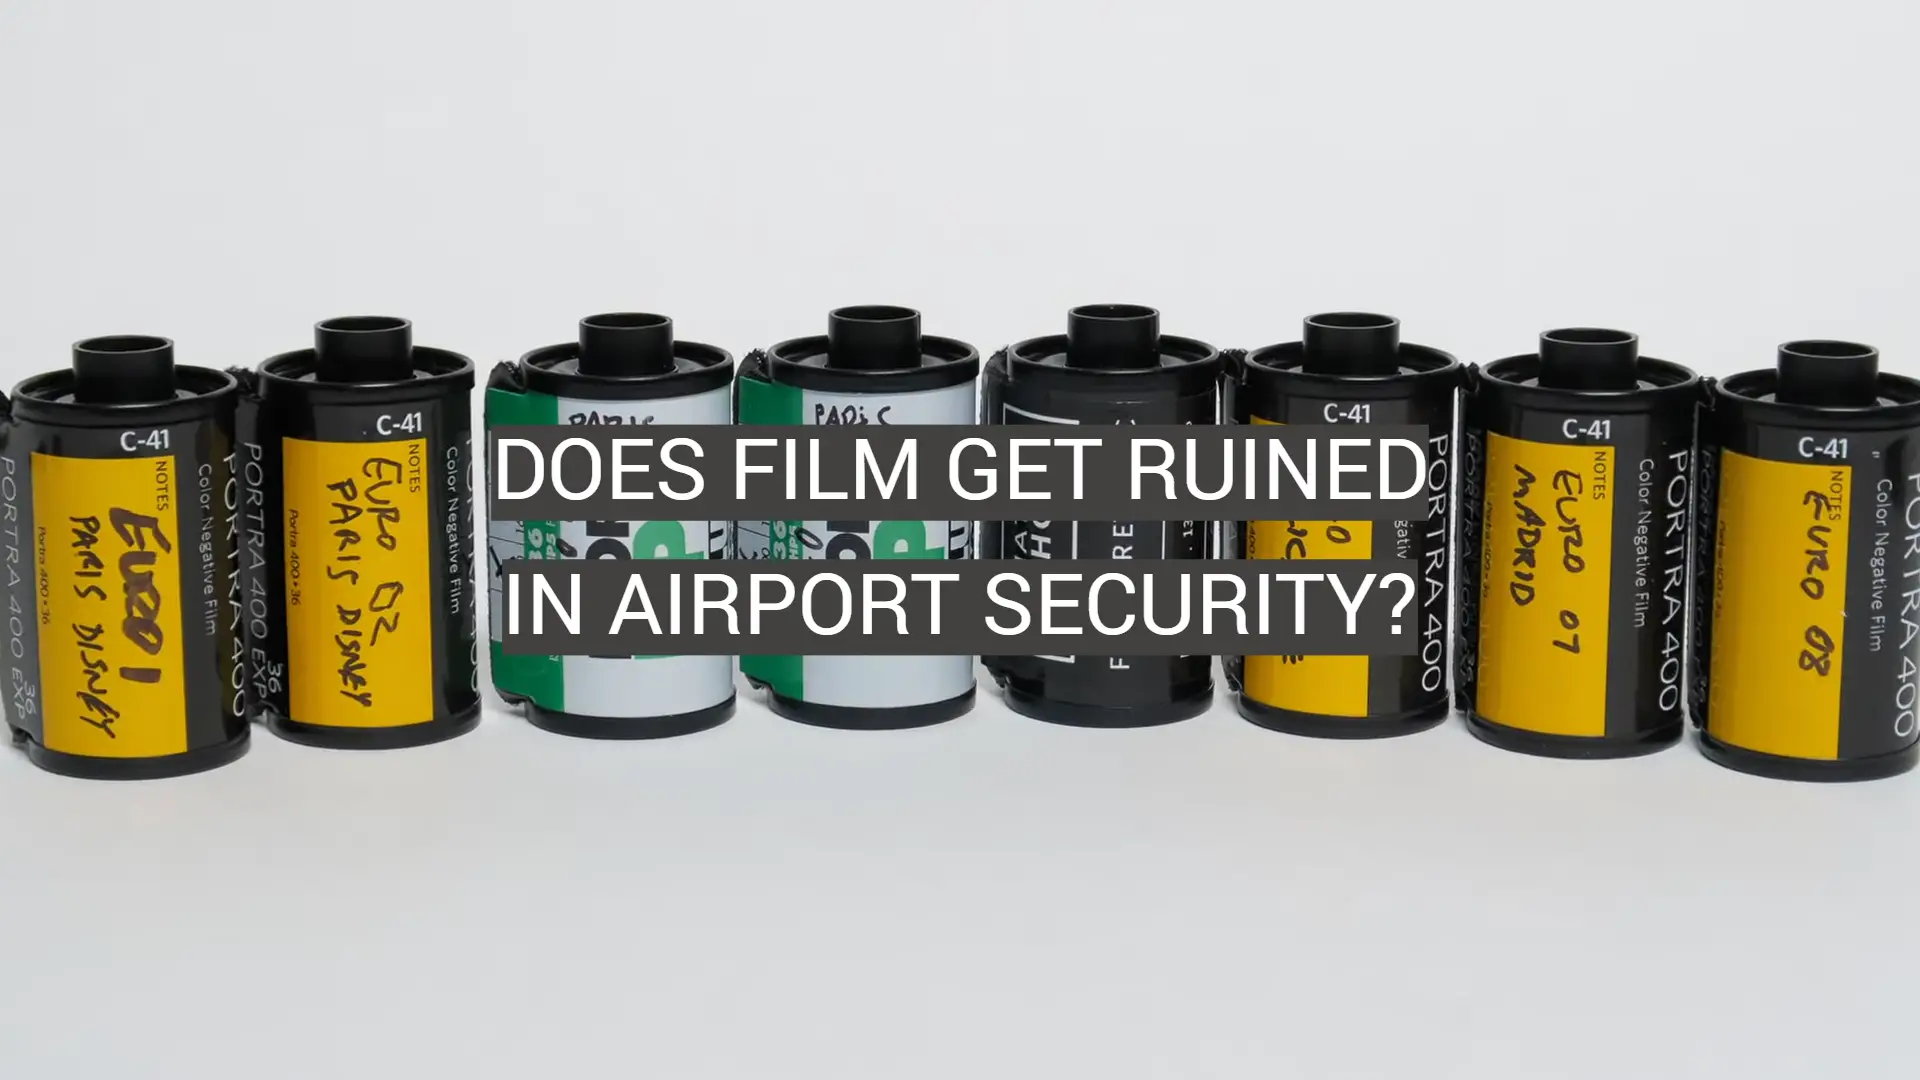 Does Film Get Ruined in Airport Security?